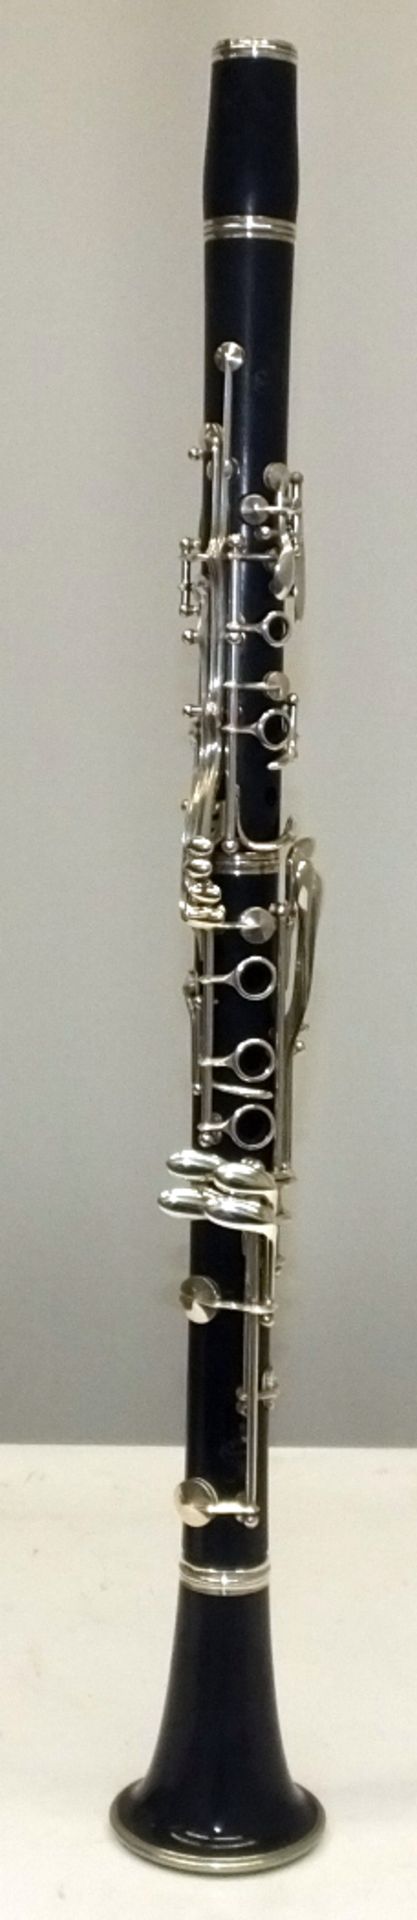 Buffet Crampon Clarinet (A) - Serial Number - 272967 - Image 8 of 10